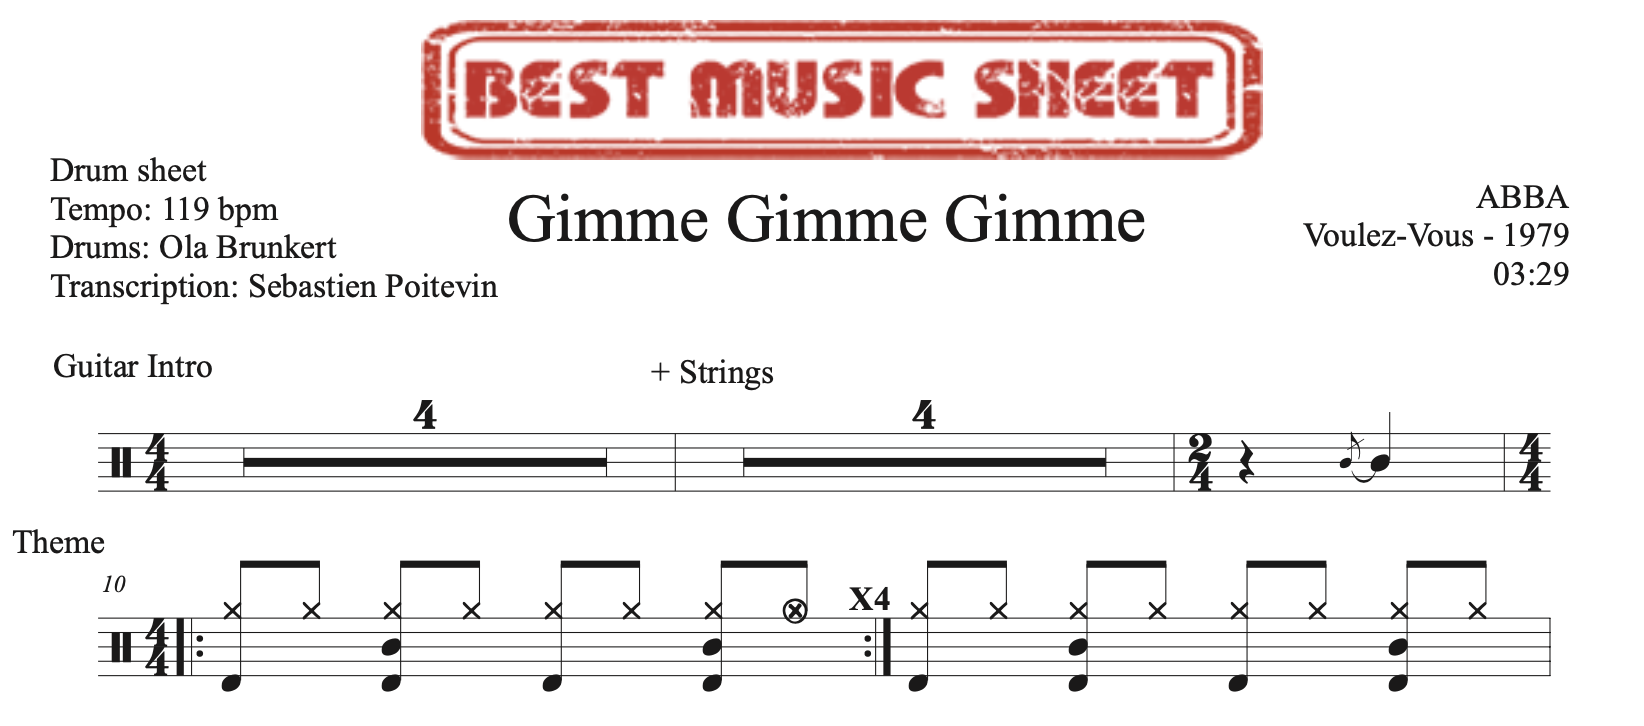 sample drum sheet of Gimme Gimme Gimme by ABBA